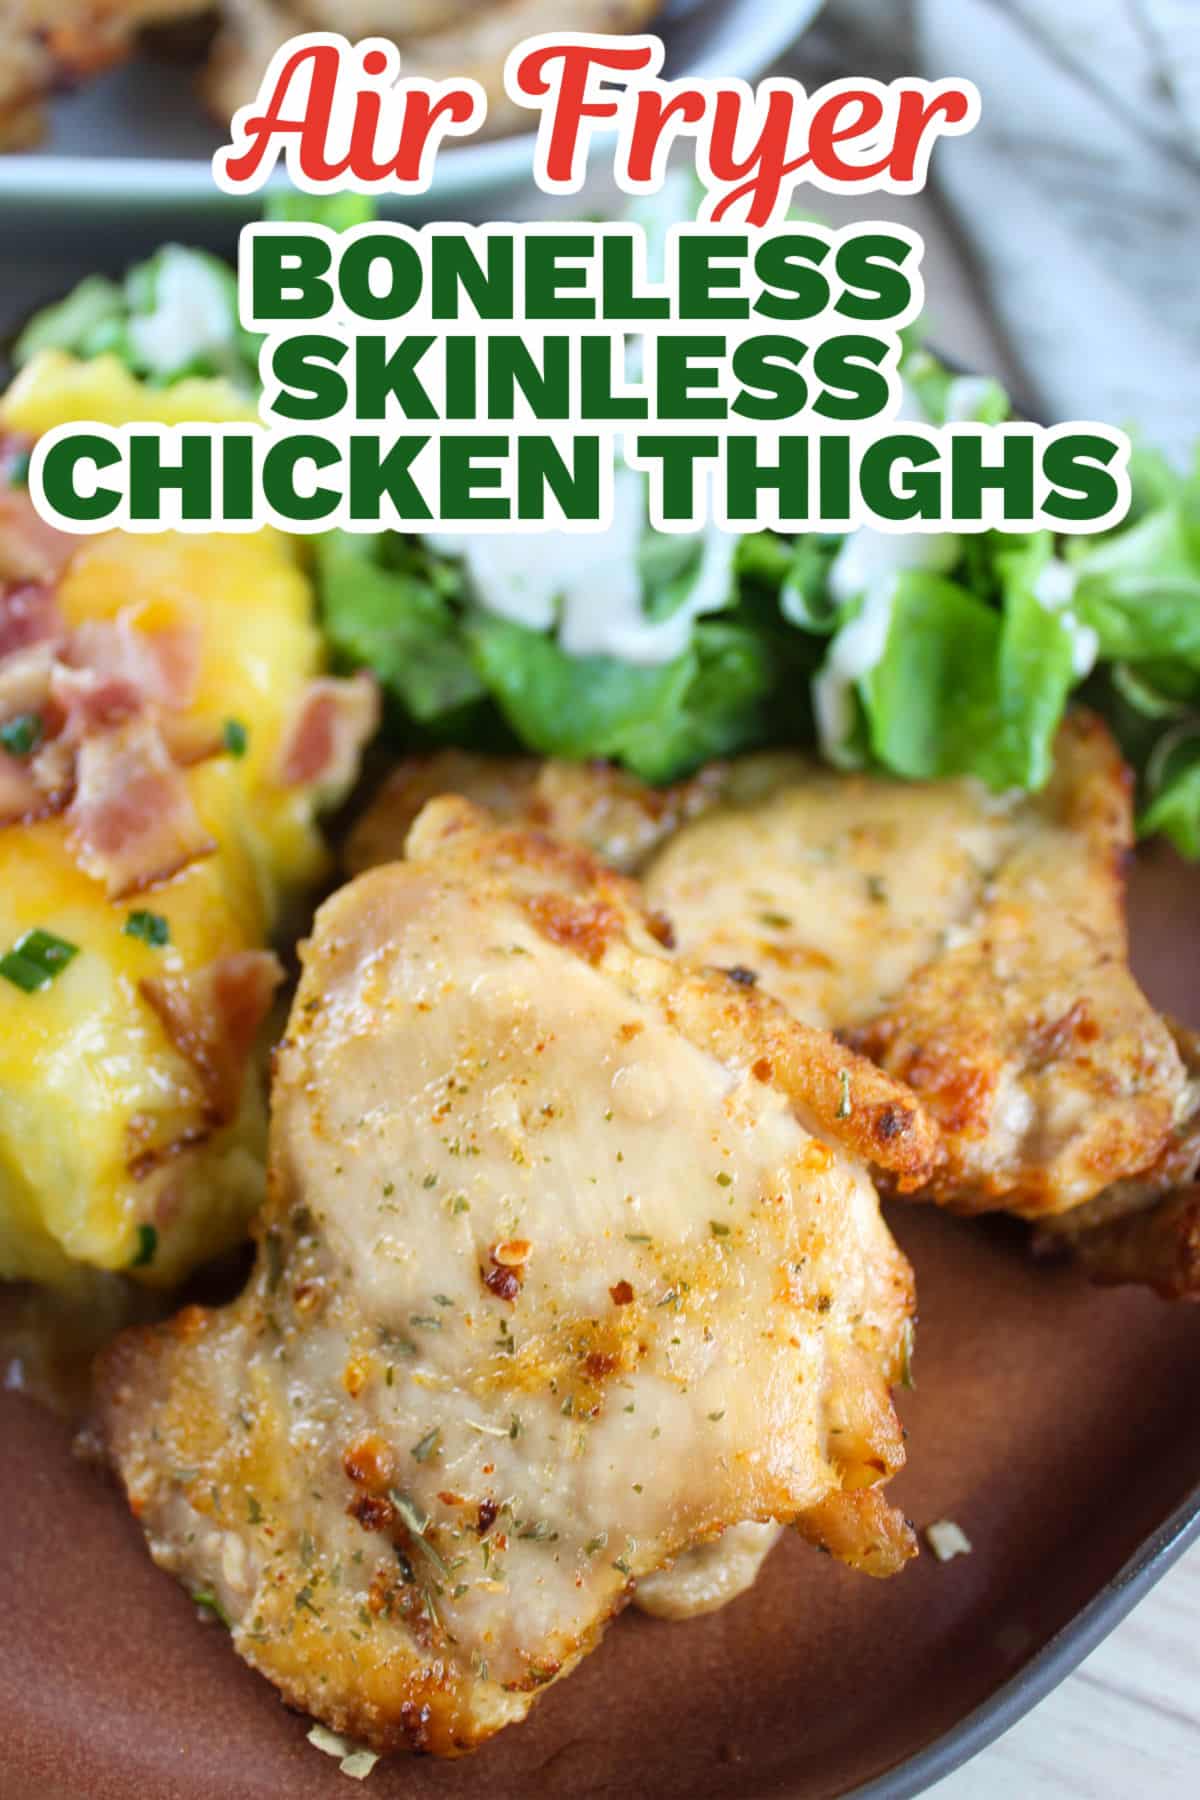 Air Fryer Boneless Skinless Chicken Thighs are a quick meal perfect for any weeknight! These juicy and tender chicken thighs are perfectly cooked in the air fryer in just 15 minutes. via @foodhussy